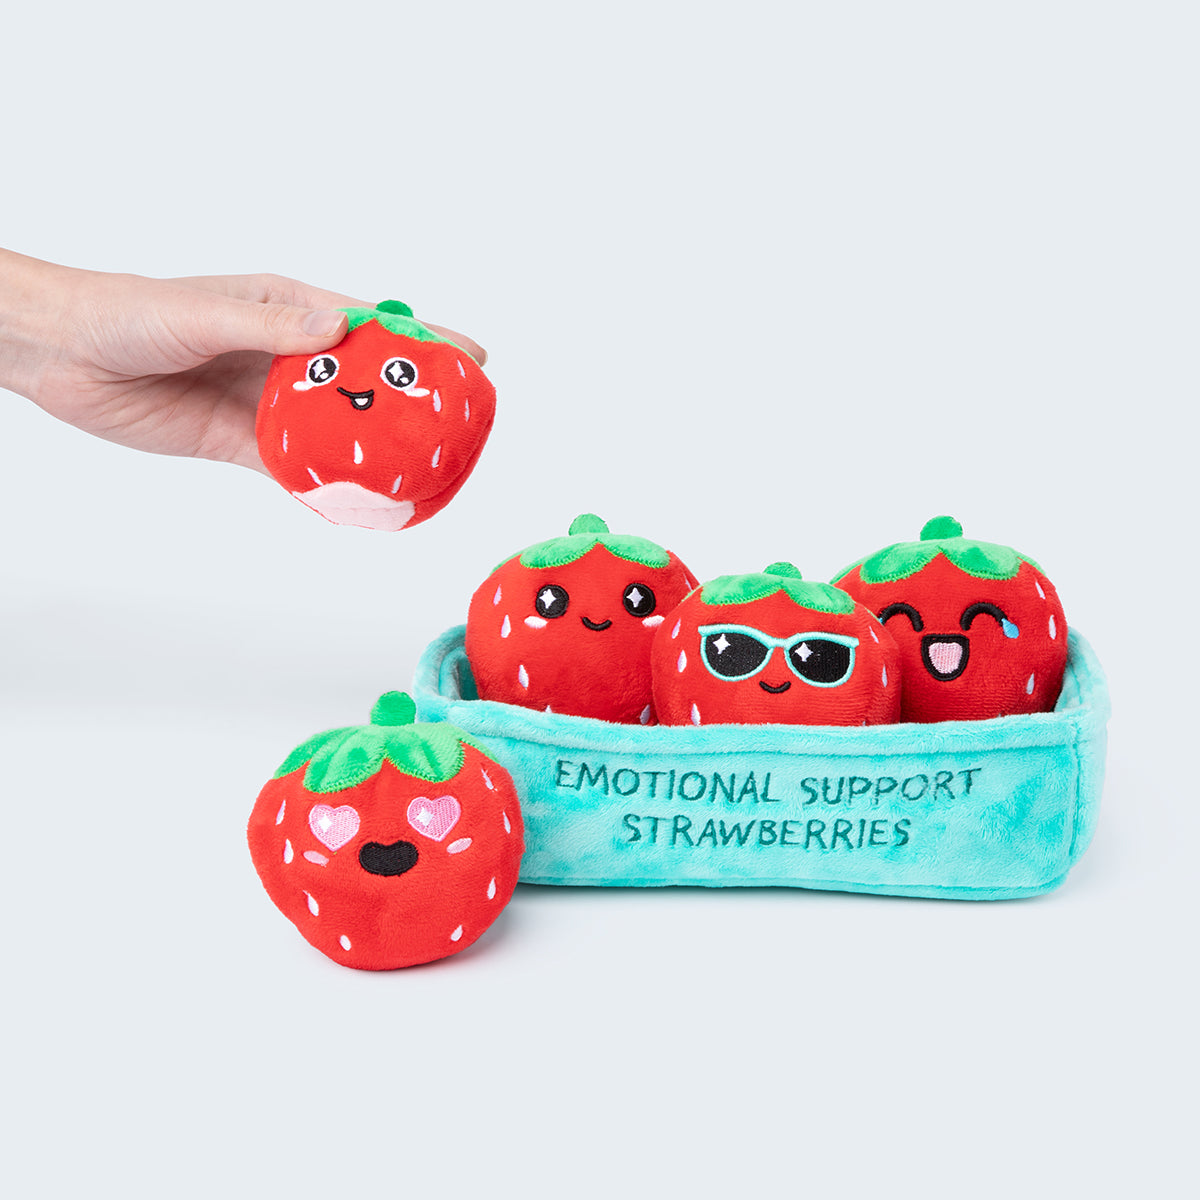 Emotional Support Strawberries - Cuddly Plush Comfort Food